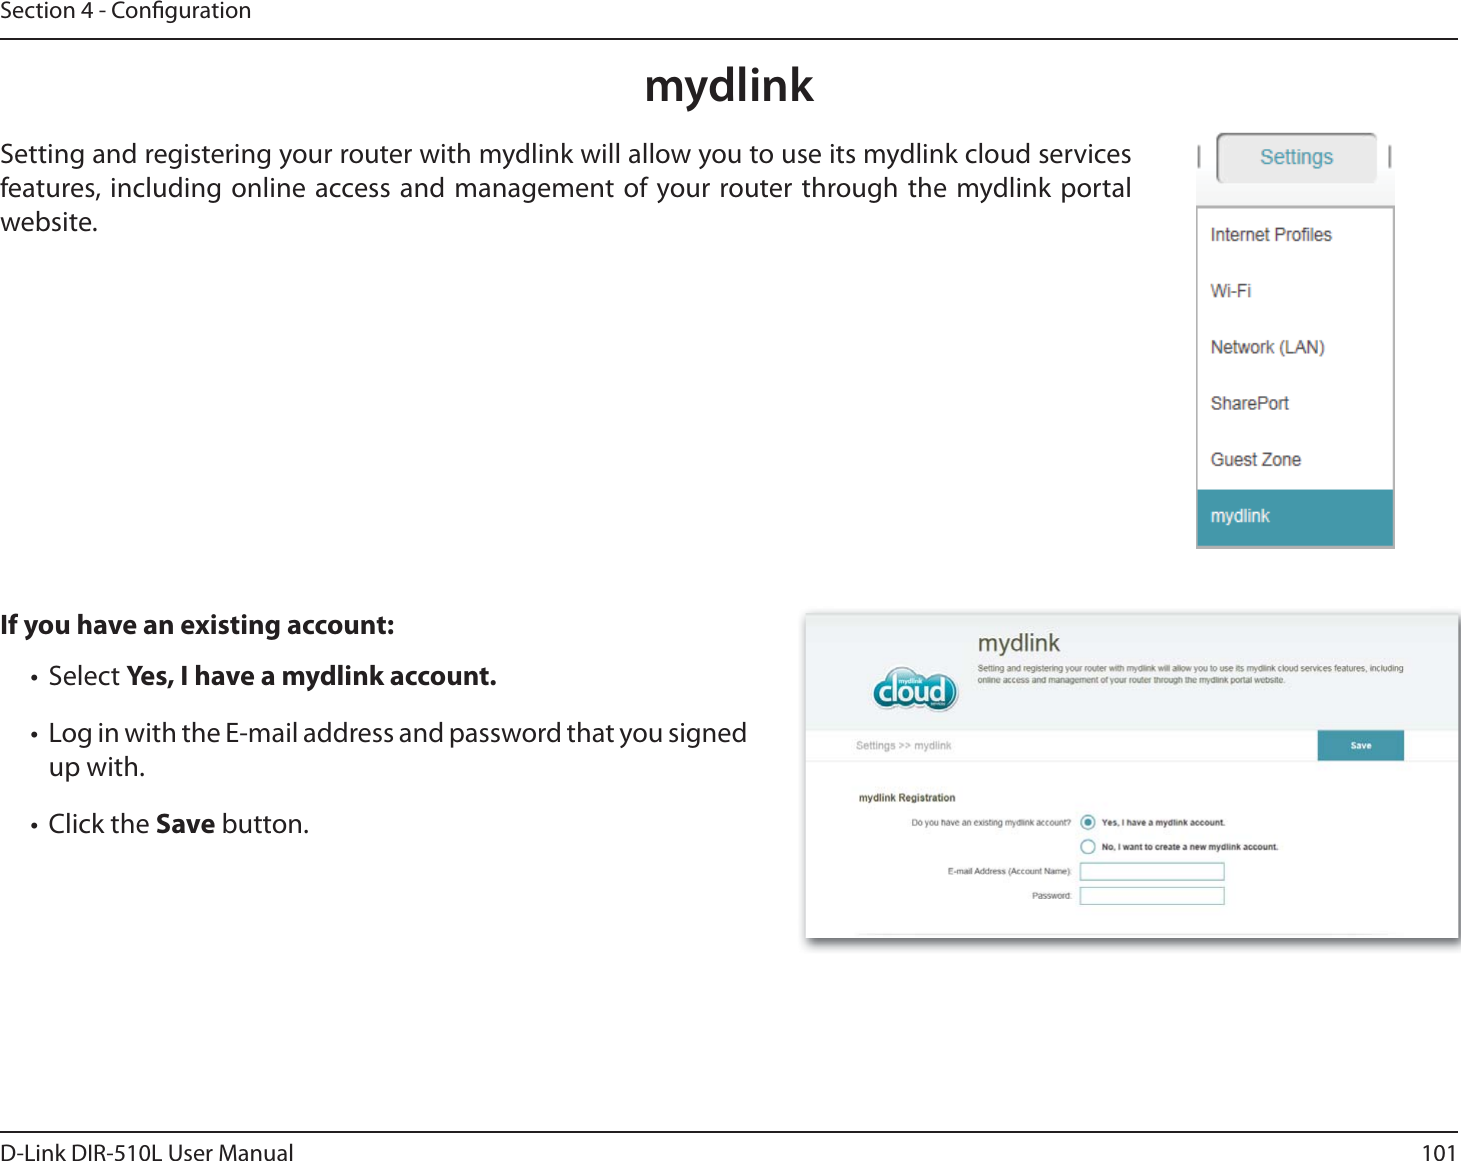 101D-Link DIR-510L User ManualSection 4 - CongurationIf you have an existing account:t Select Yes, I have a mydlink account.t Log in with the E-mail address and password that you signed up with.t Click the Save button.Setting and registering your router with mydlink will allow you to use its mydlink cloud services features, including online access and management of your router through the mydlink portal website.mydlink